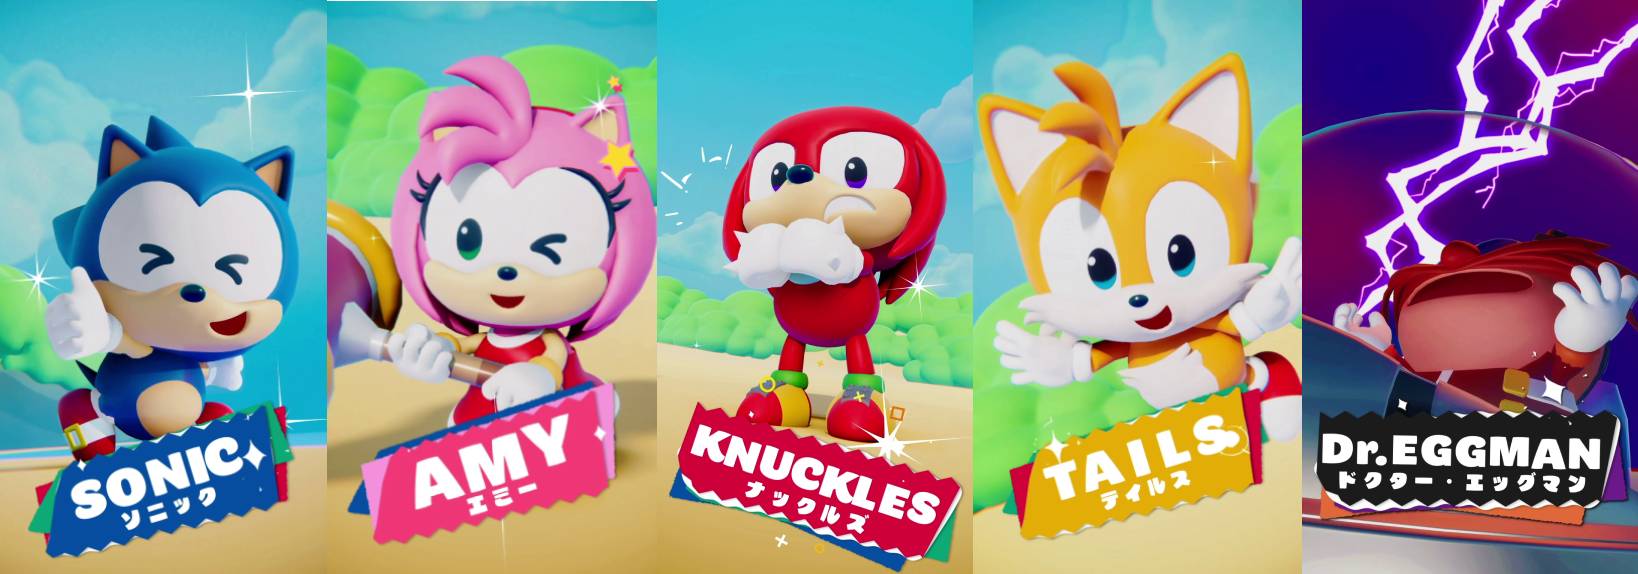 SONIC THE HEDGEHOG has been given a new look on SEGA’s official TikTok account